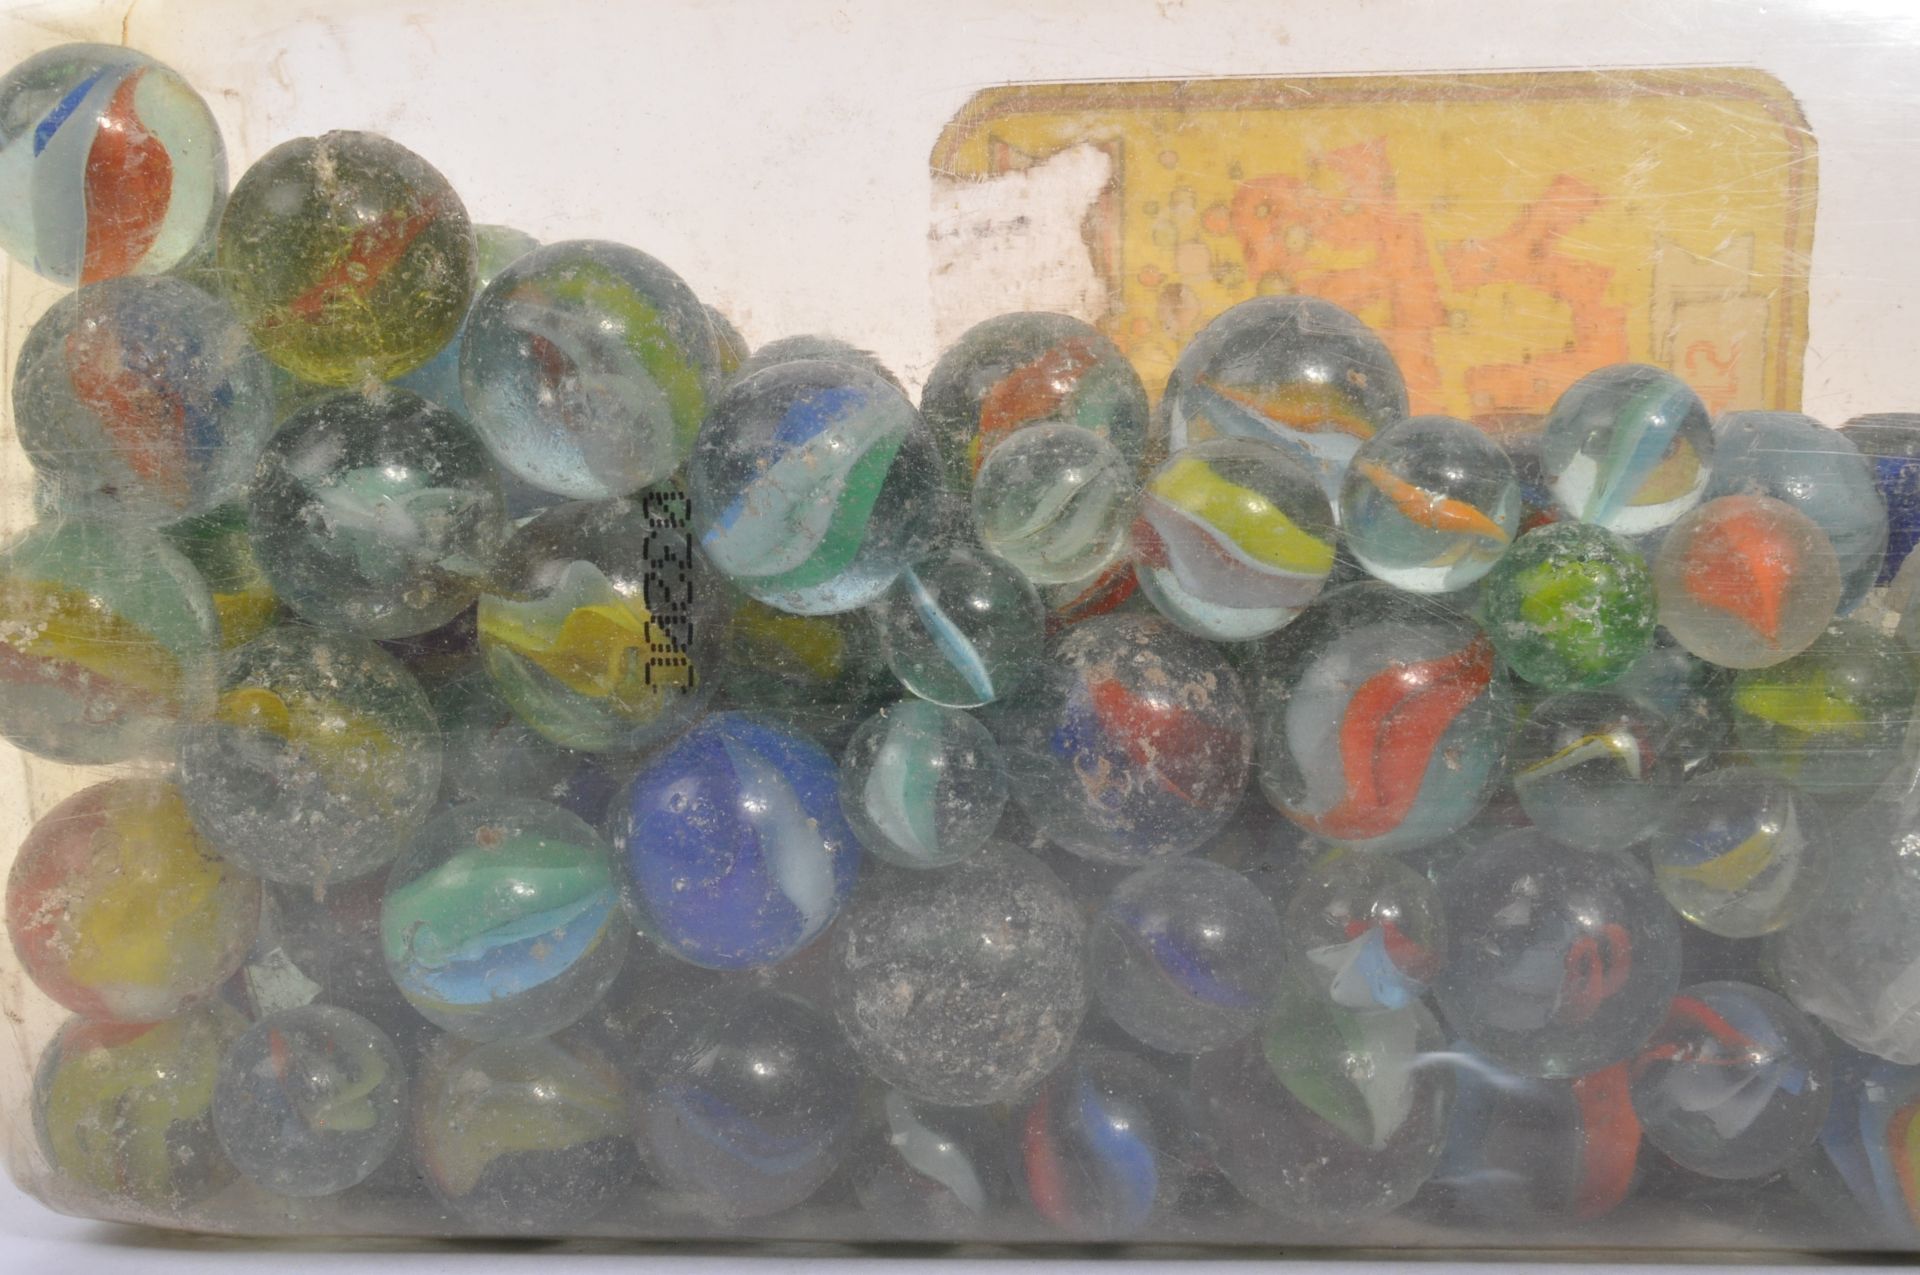 LARGE COLLECTION OF VINTAGE 20TH CENTURY CATS EYE MARBLES - Image 5 of 5